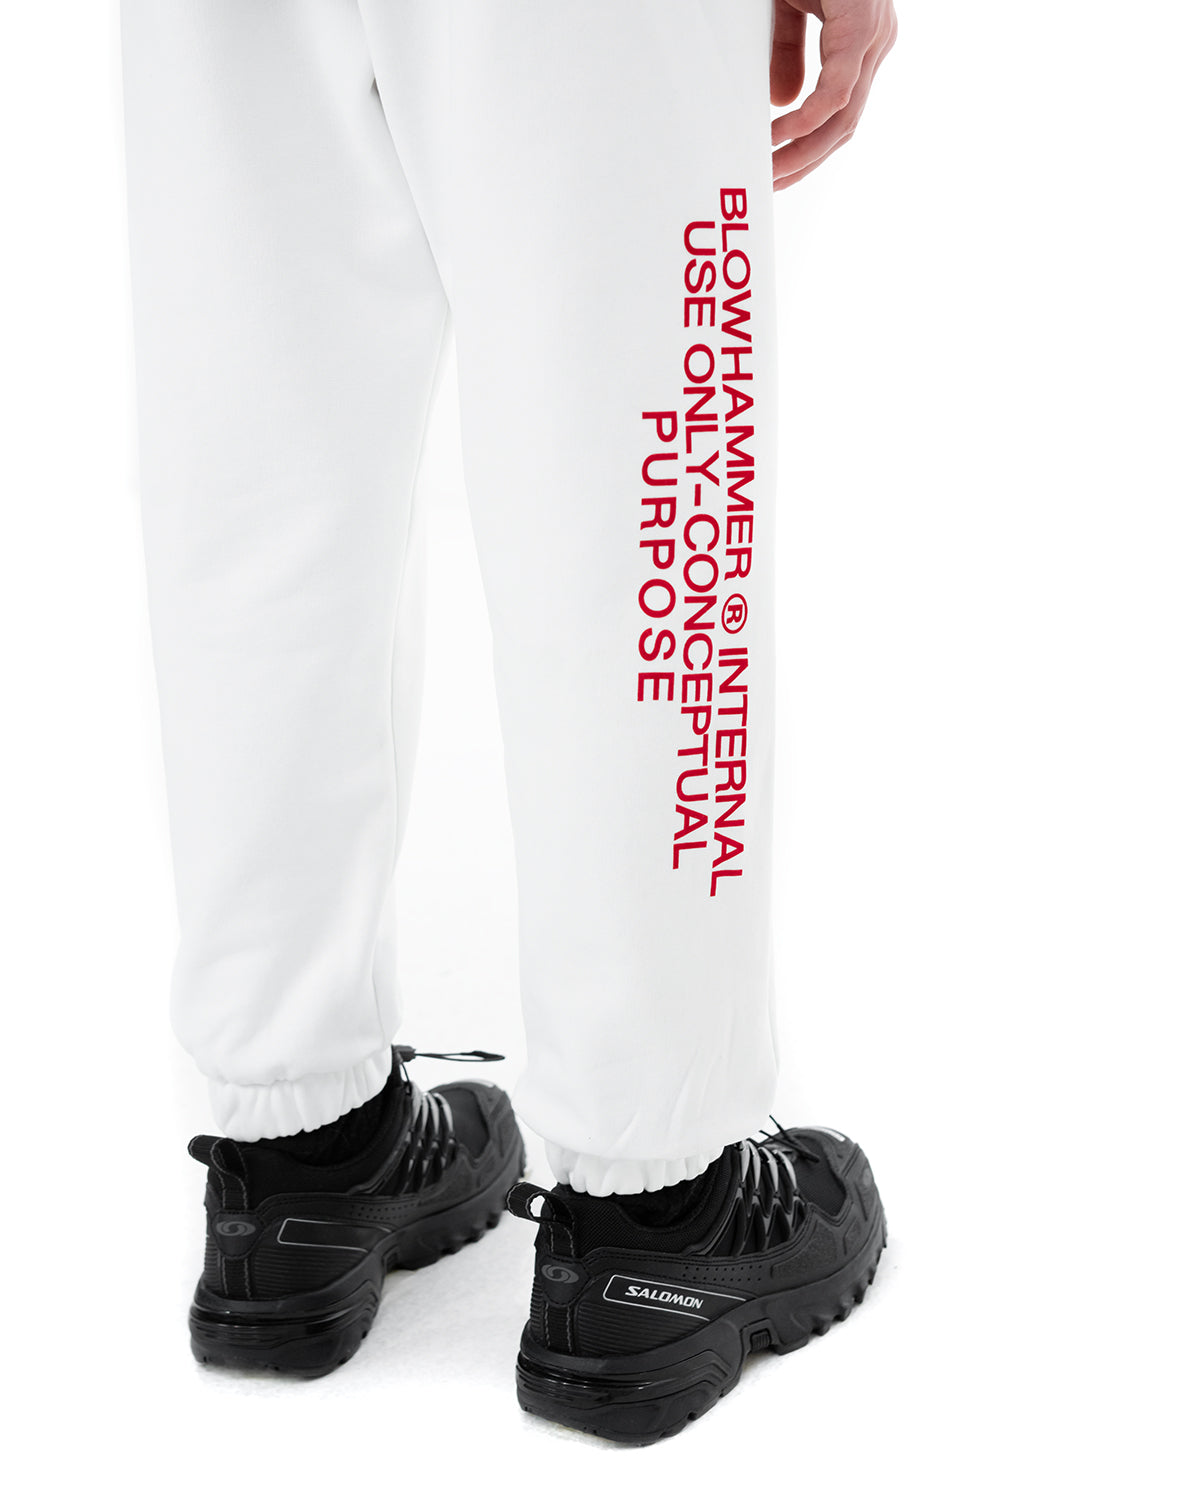 Concept Joggers | Blowhammer